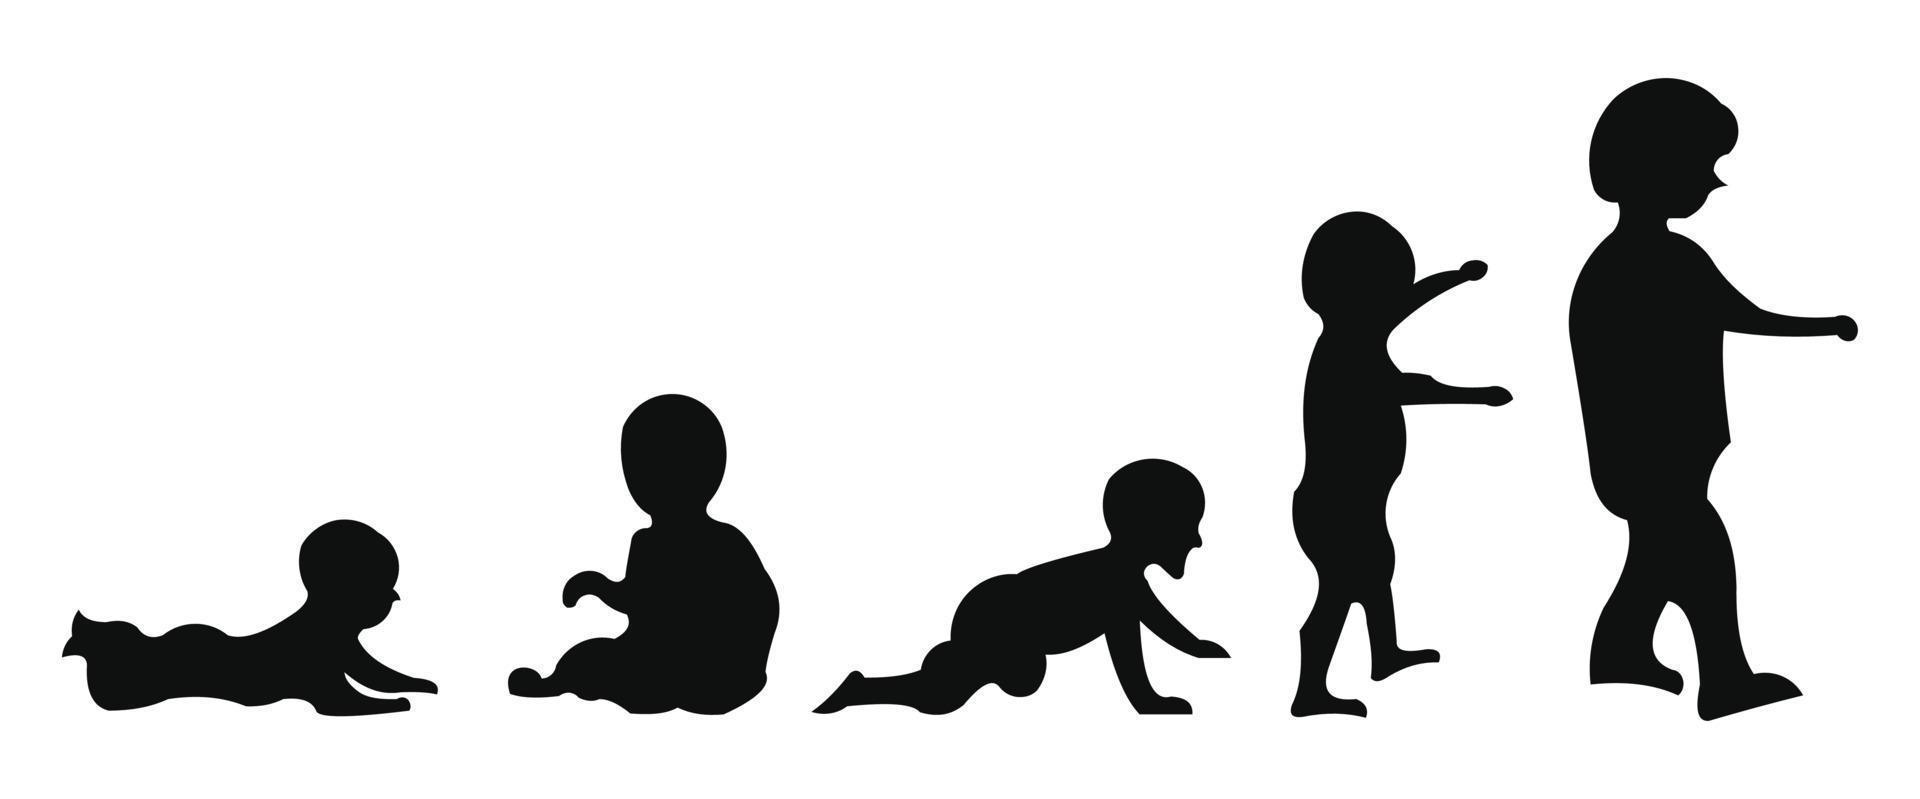 baby development icon, child growth stages. toddler milestones of first year. vector illustration